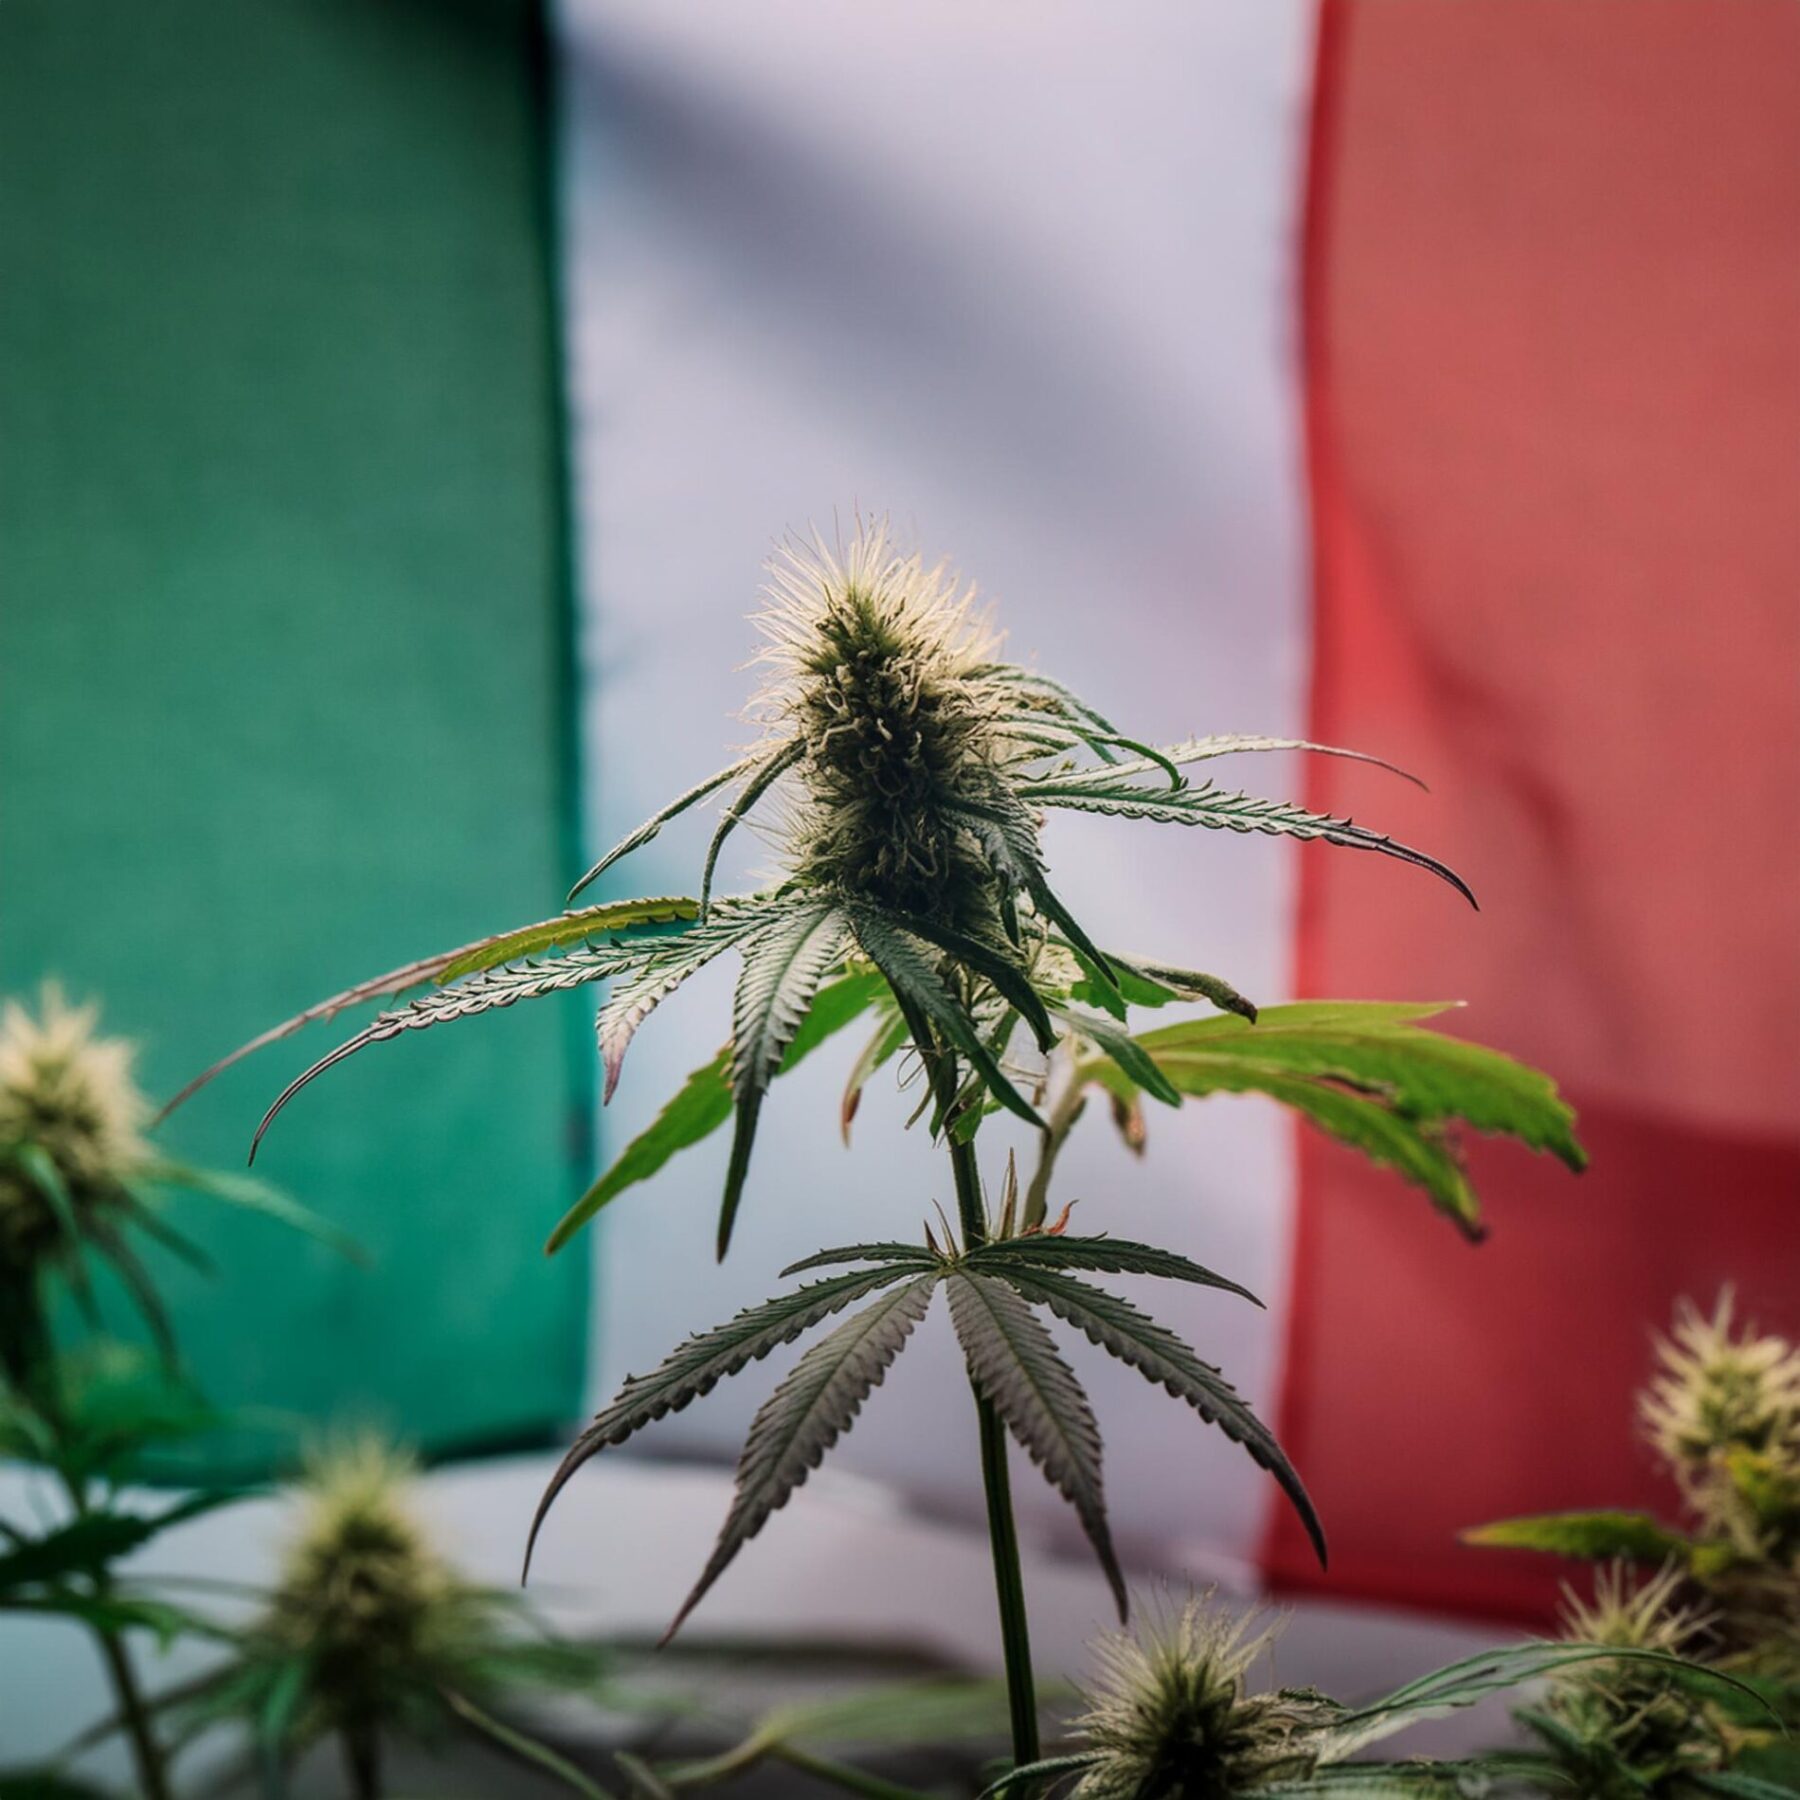 Italy’s hemp industry has called European Commission to intervene after ...